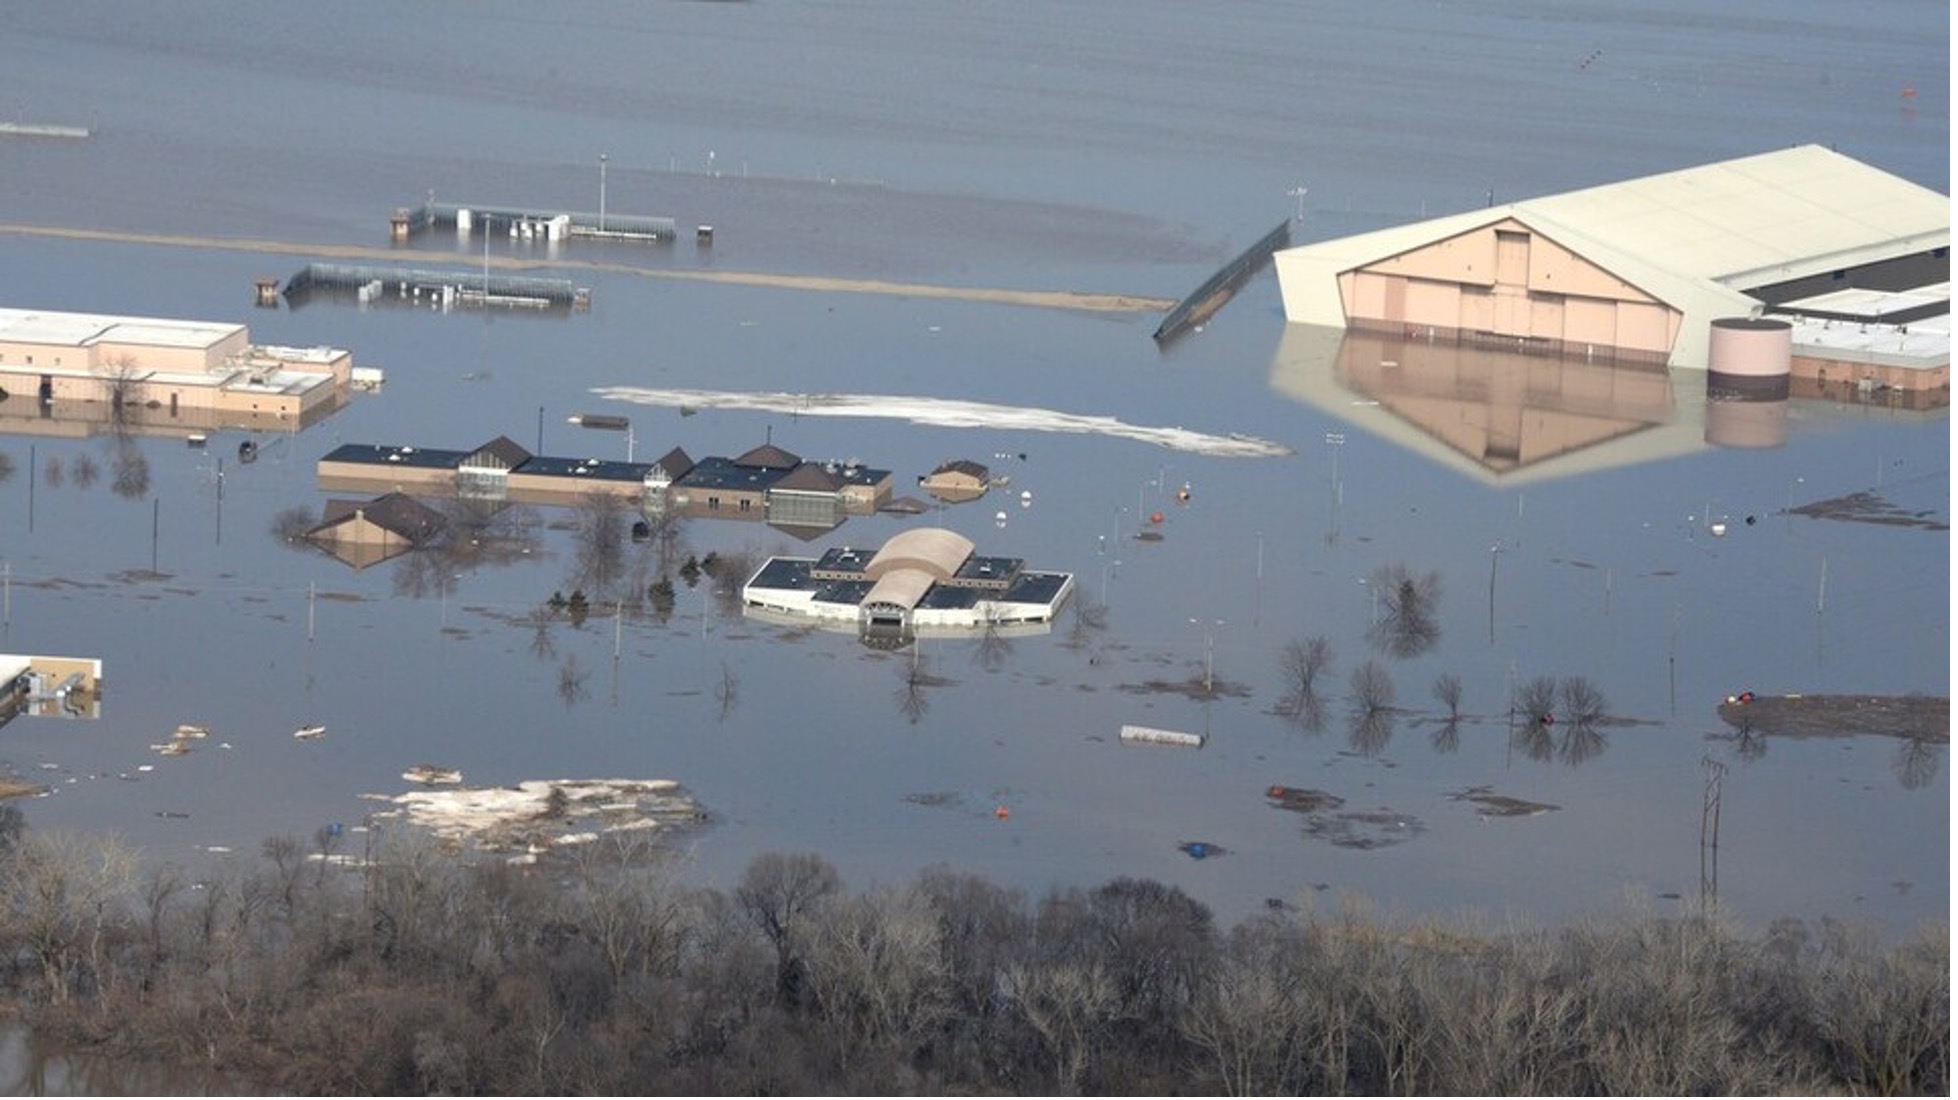 Many buildings on the southern half of Offutt Air Force Base near Bellevue, Nebraska, are flooded in March 2019.